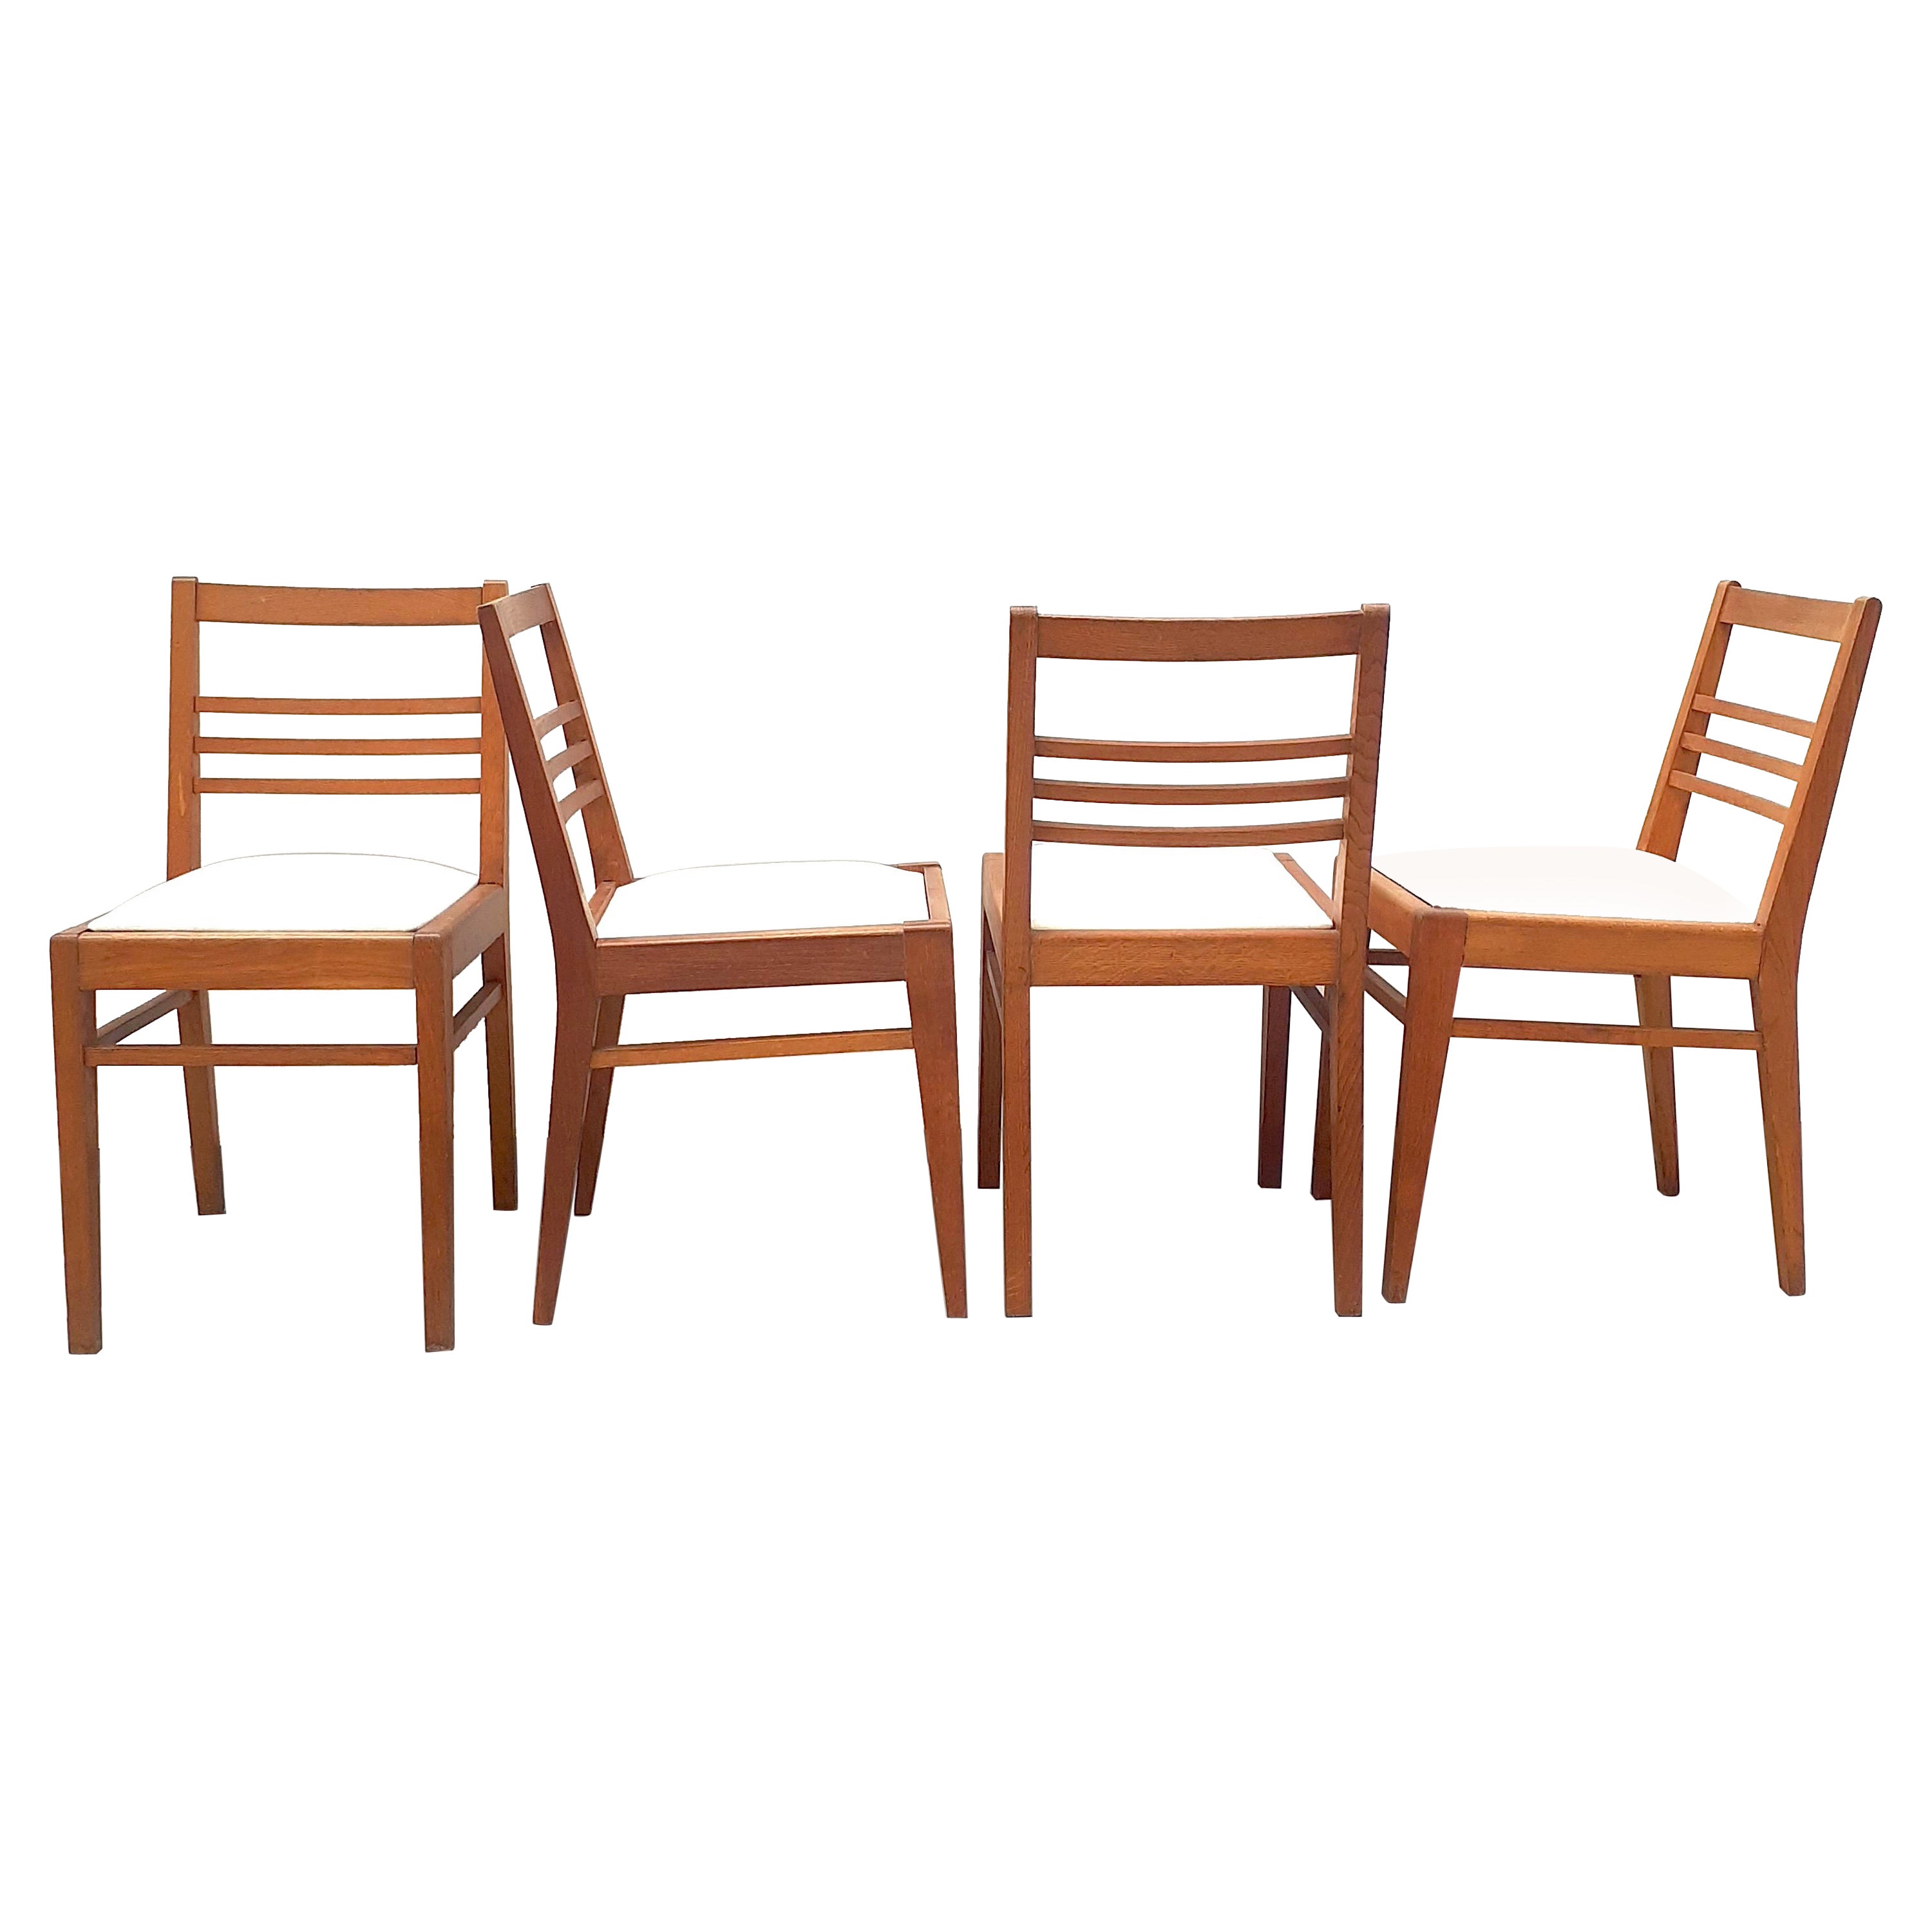 Set of 4 Oak Chairs with White Fabric Seat by René Gabriel, 1950s For Sale